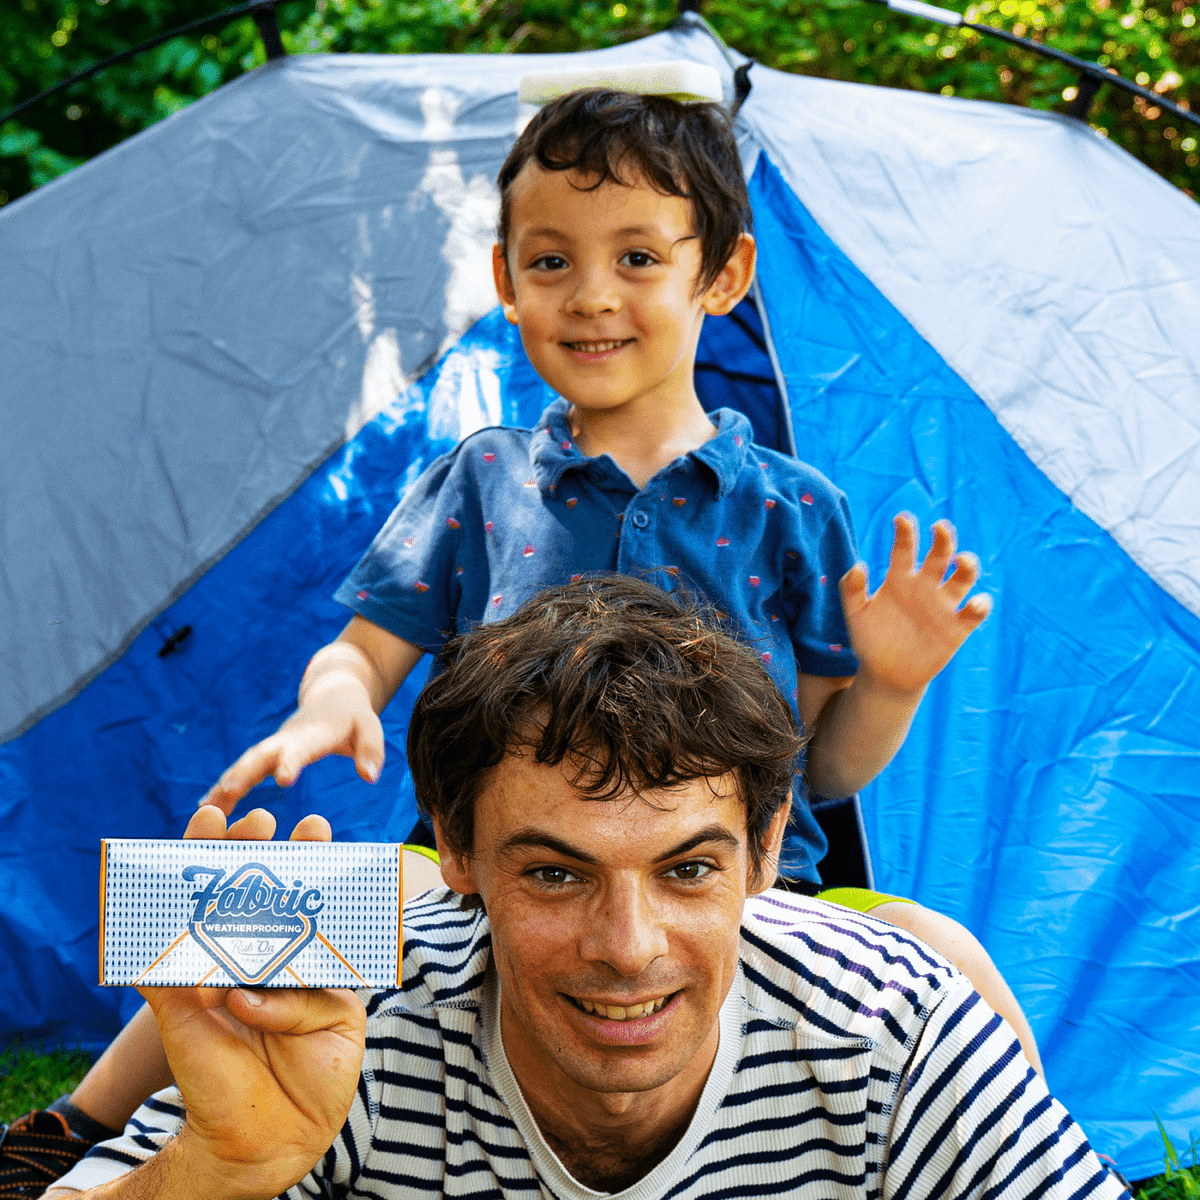 Max-&-Arlen-with-wax-in-front-of-tent how to waterproof fabric naturally